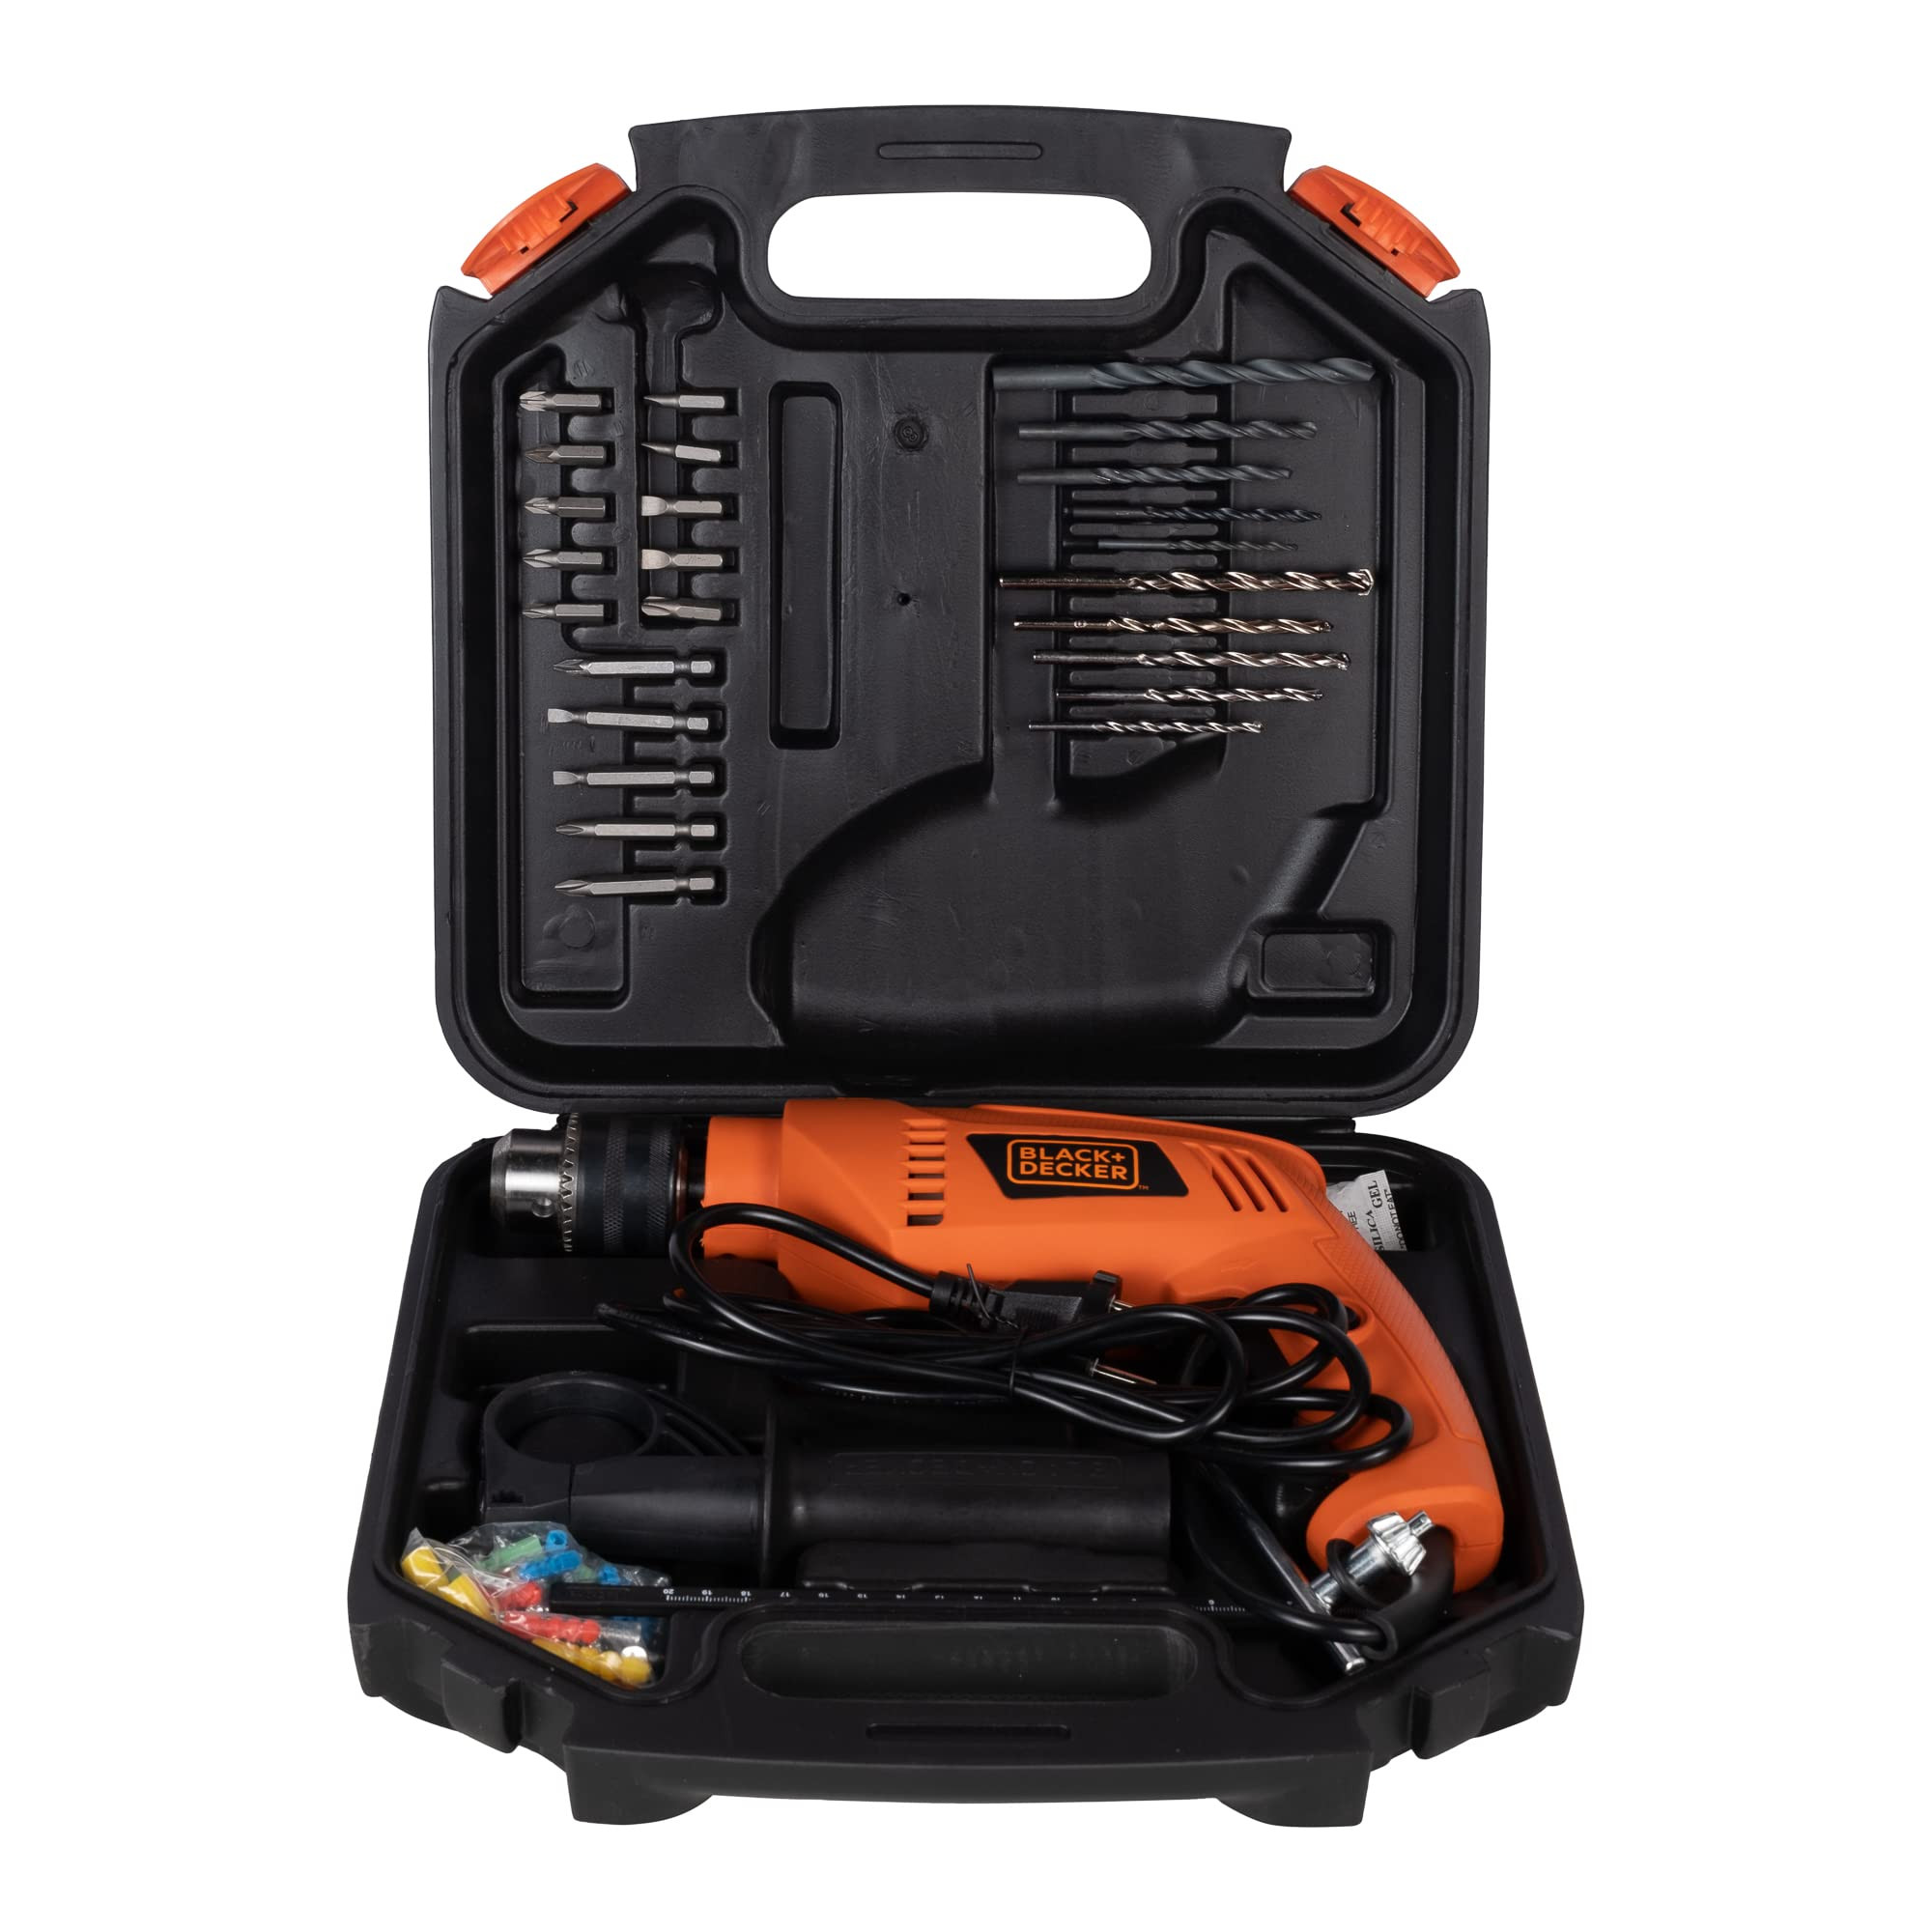 BLACK+DECKER HD555K50 550W 13mm Corded Variable Speed Reversible Impact Drill Machine Kit for Home & DIY Use (50 Accessories Kitbox) For Masonry, Brick & Wood, 1 Year Warranty, ORANGE & BLACK